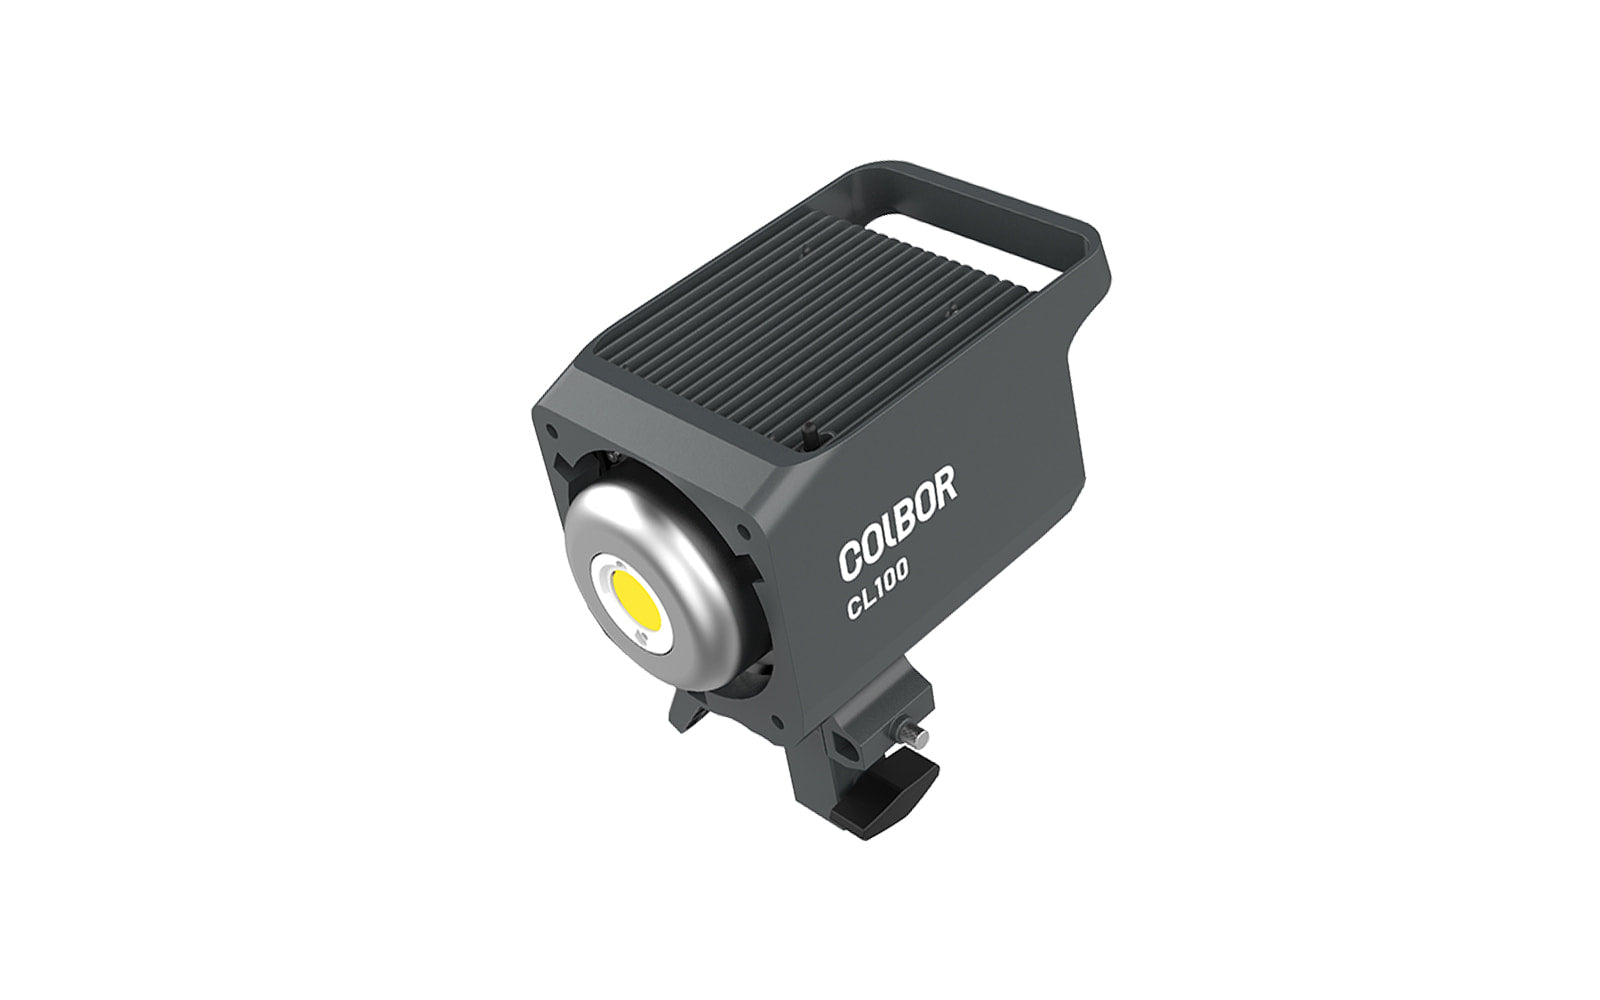 COLBOR CL100 COB LED light is square and black and has a grip for carrying.